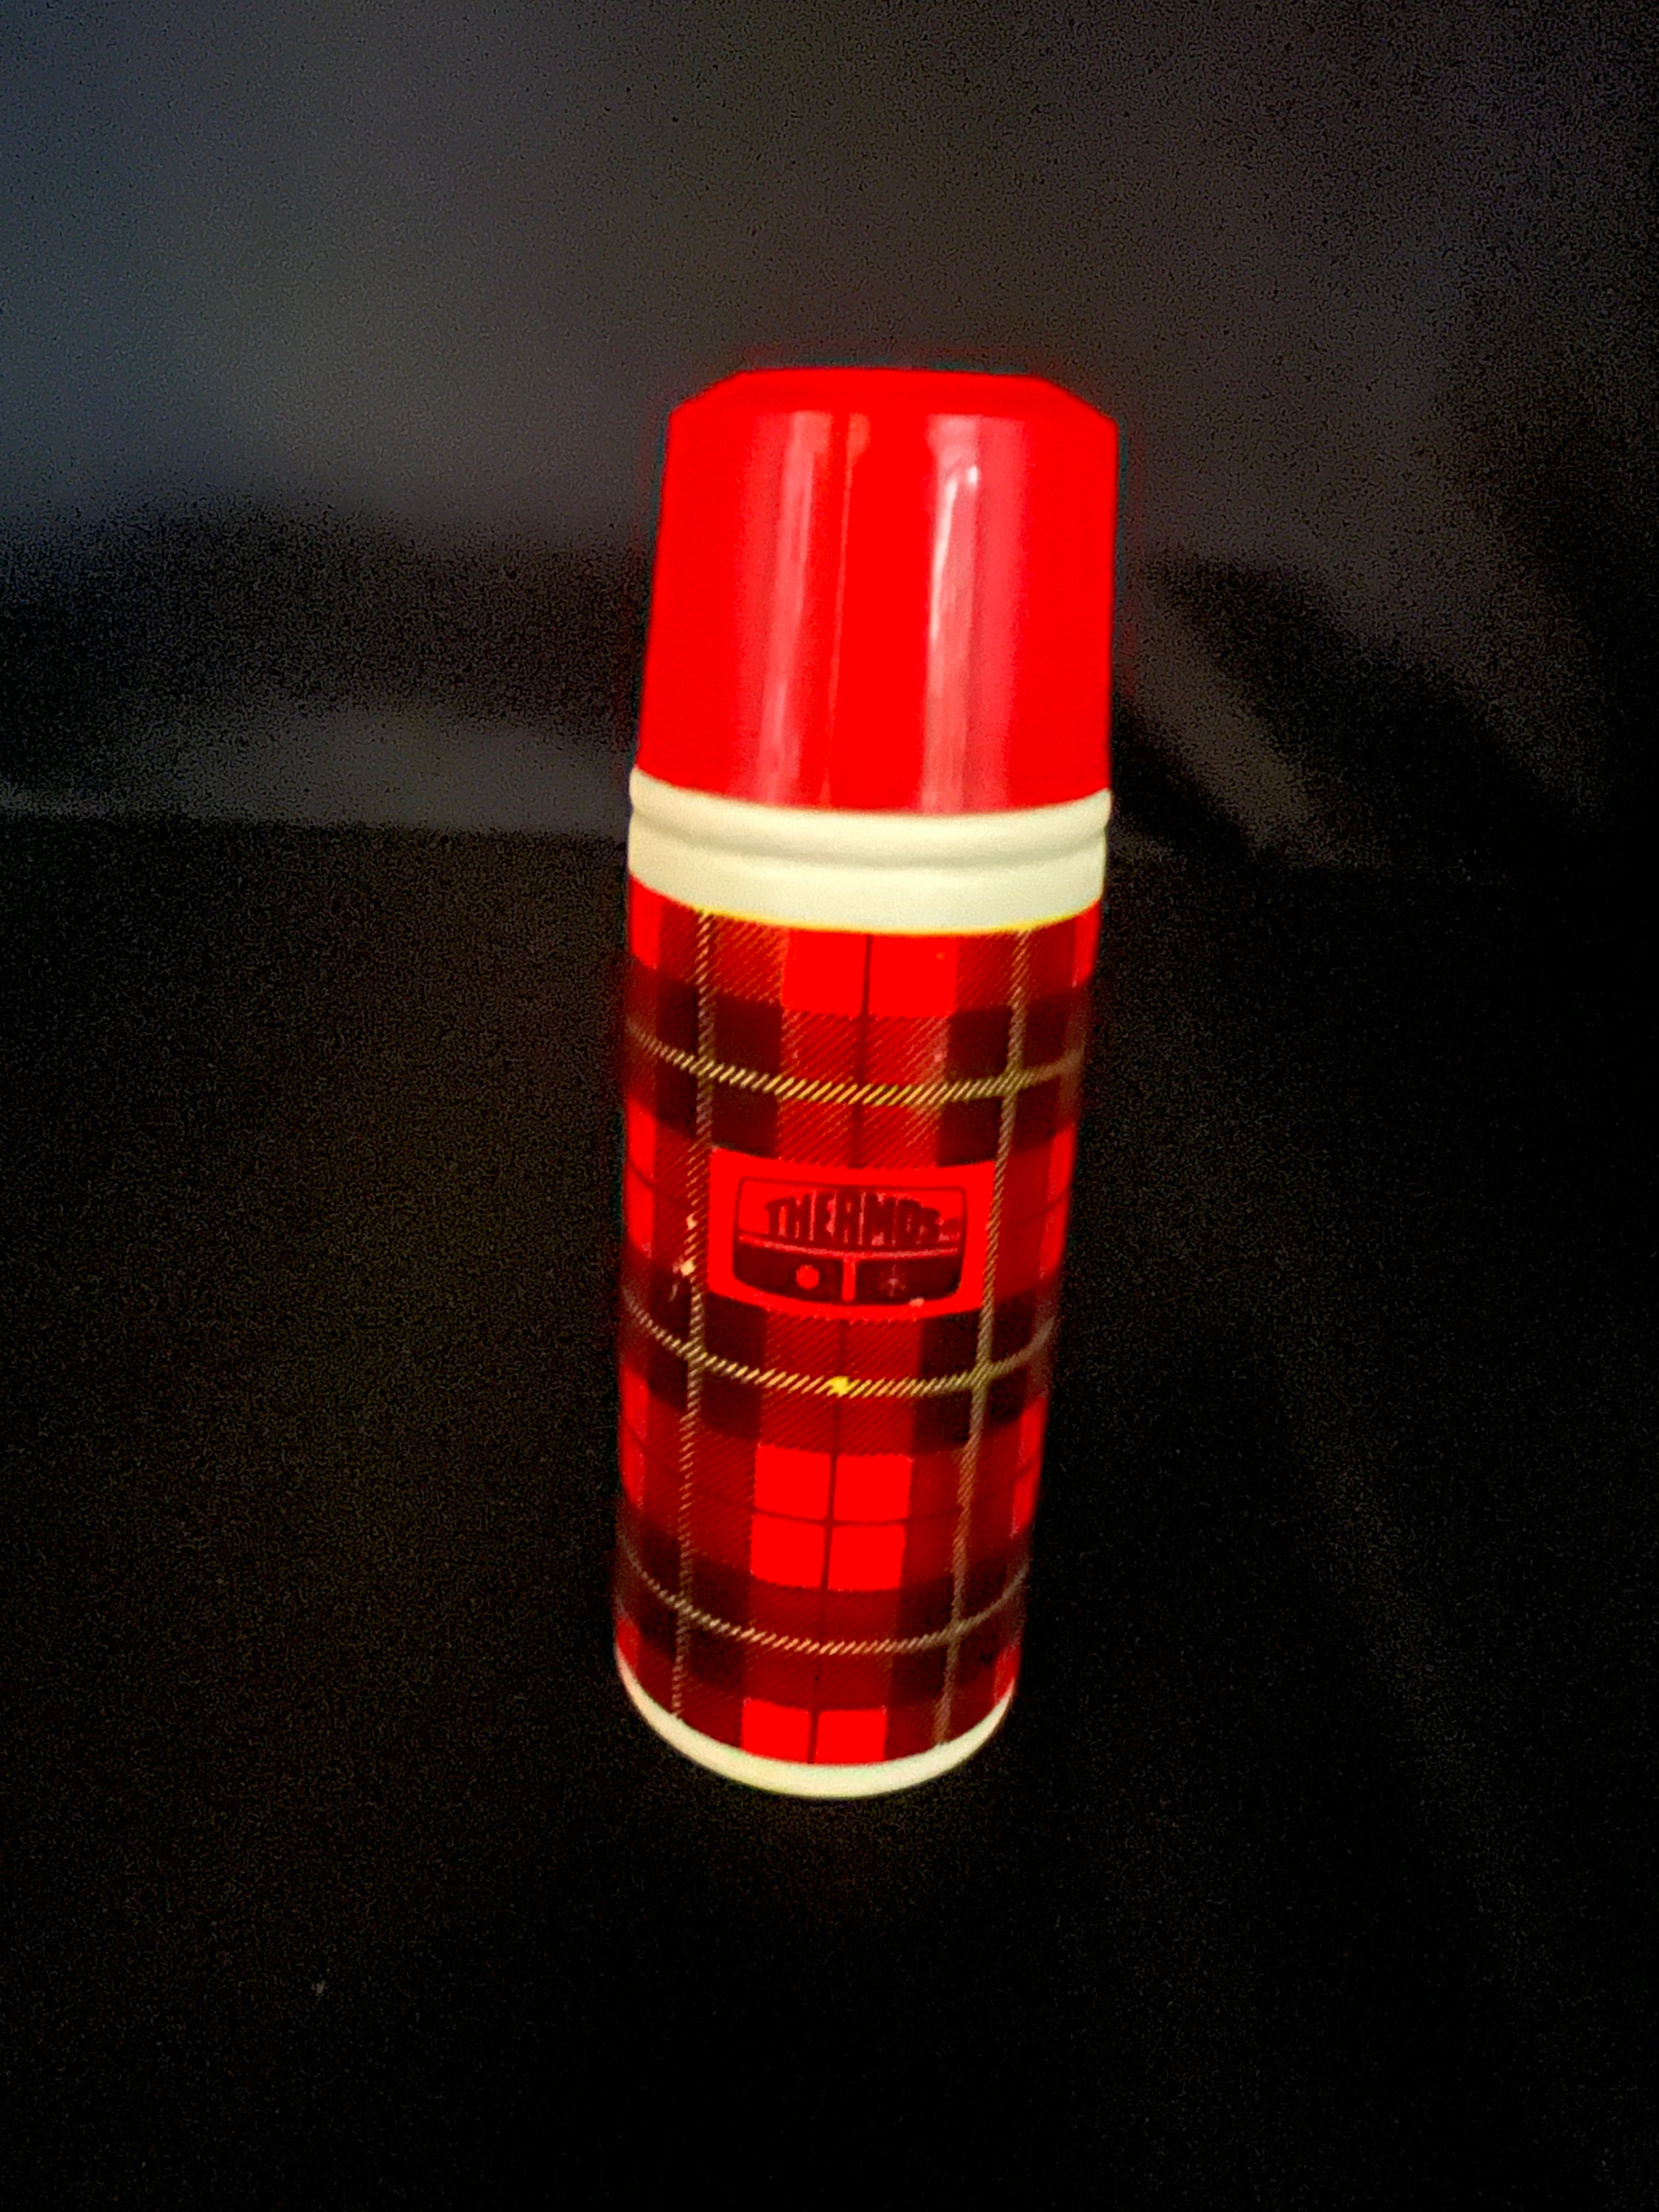 Vintage Red and Yellow Plaid 1-Pint Glass Thermos